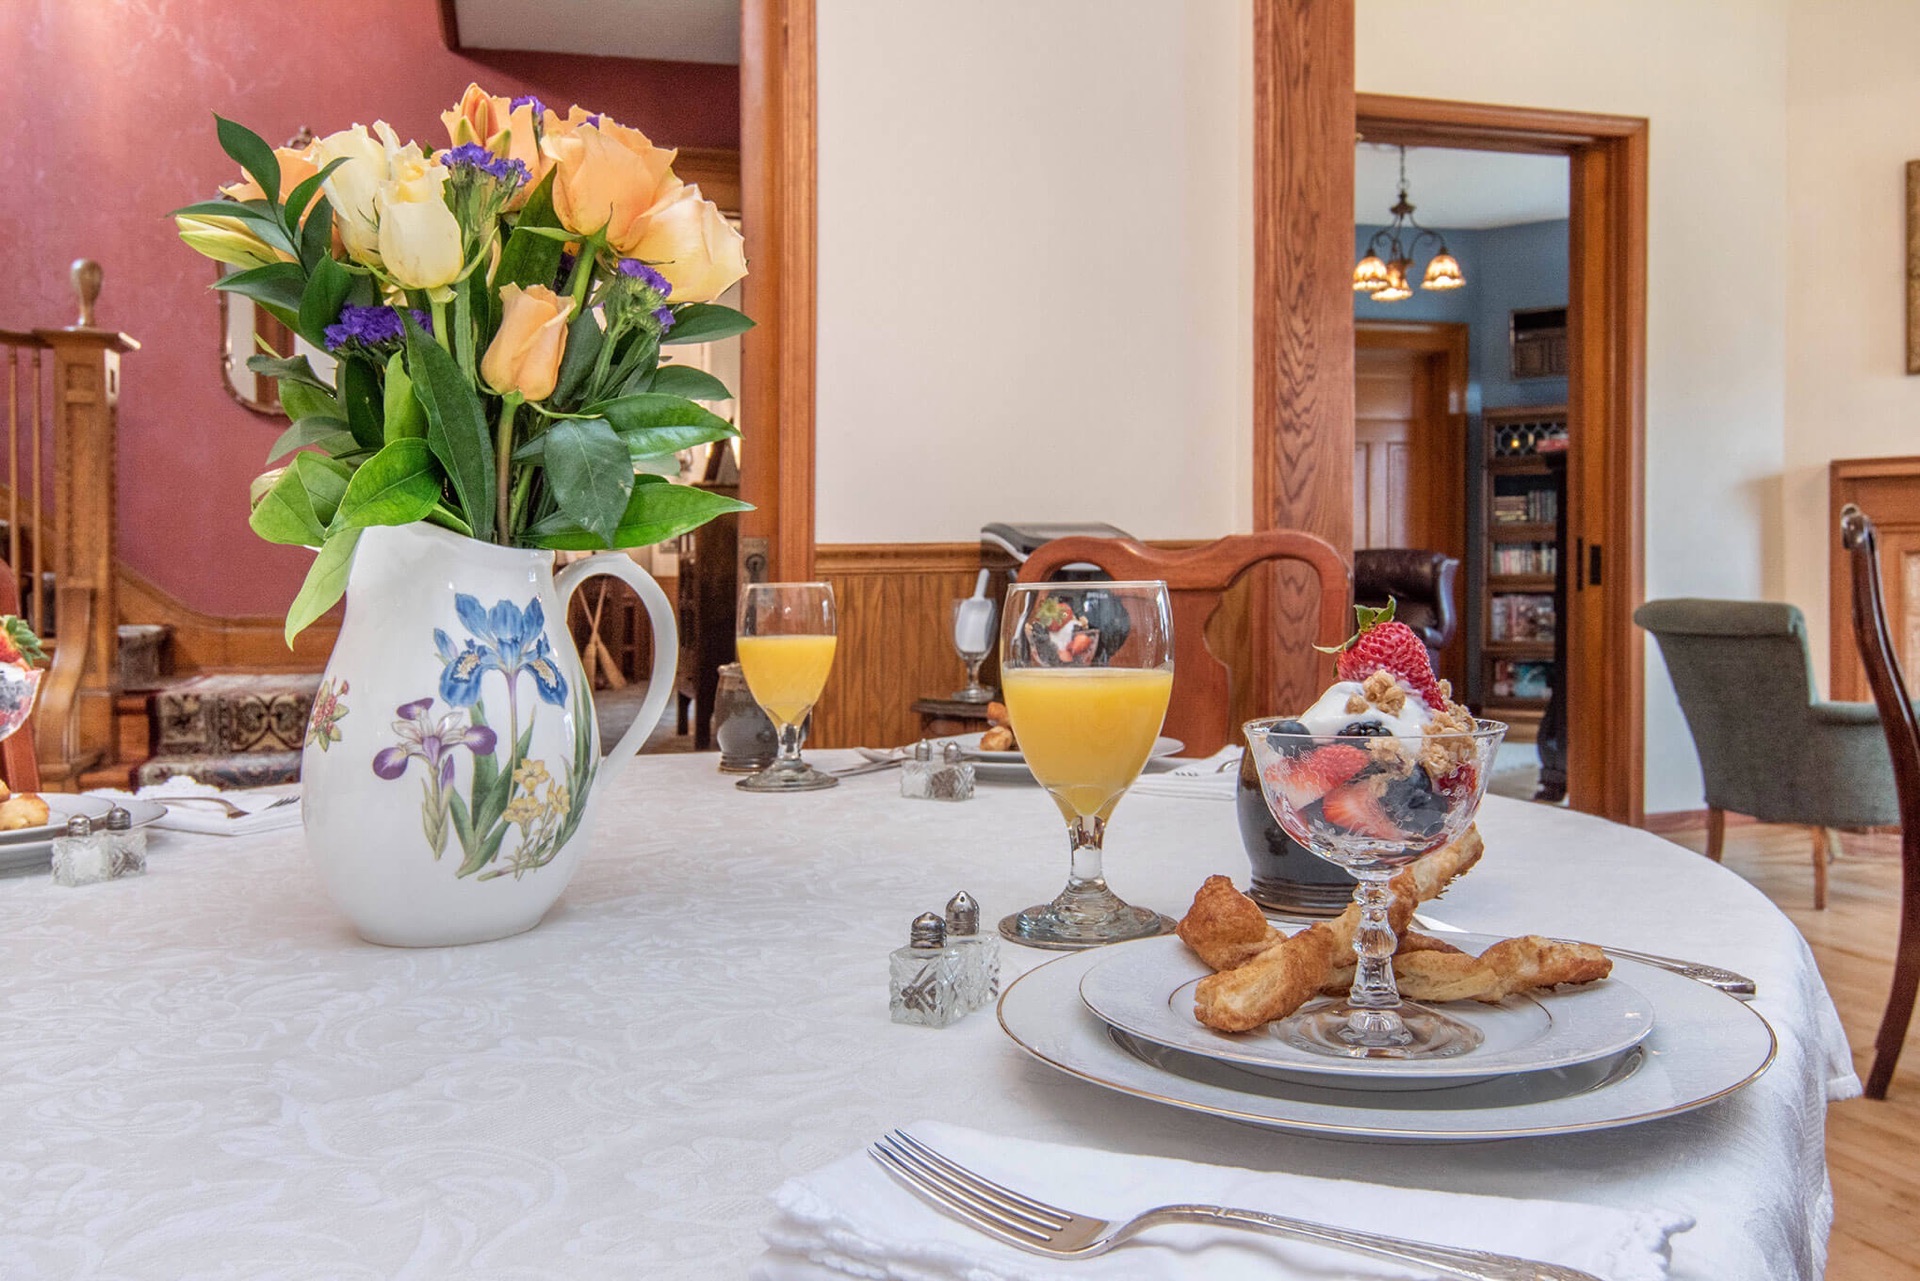 Breakfast table at Lamplighter B&B of Ludington is set with a vase of flowers, fruit course and orange juice